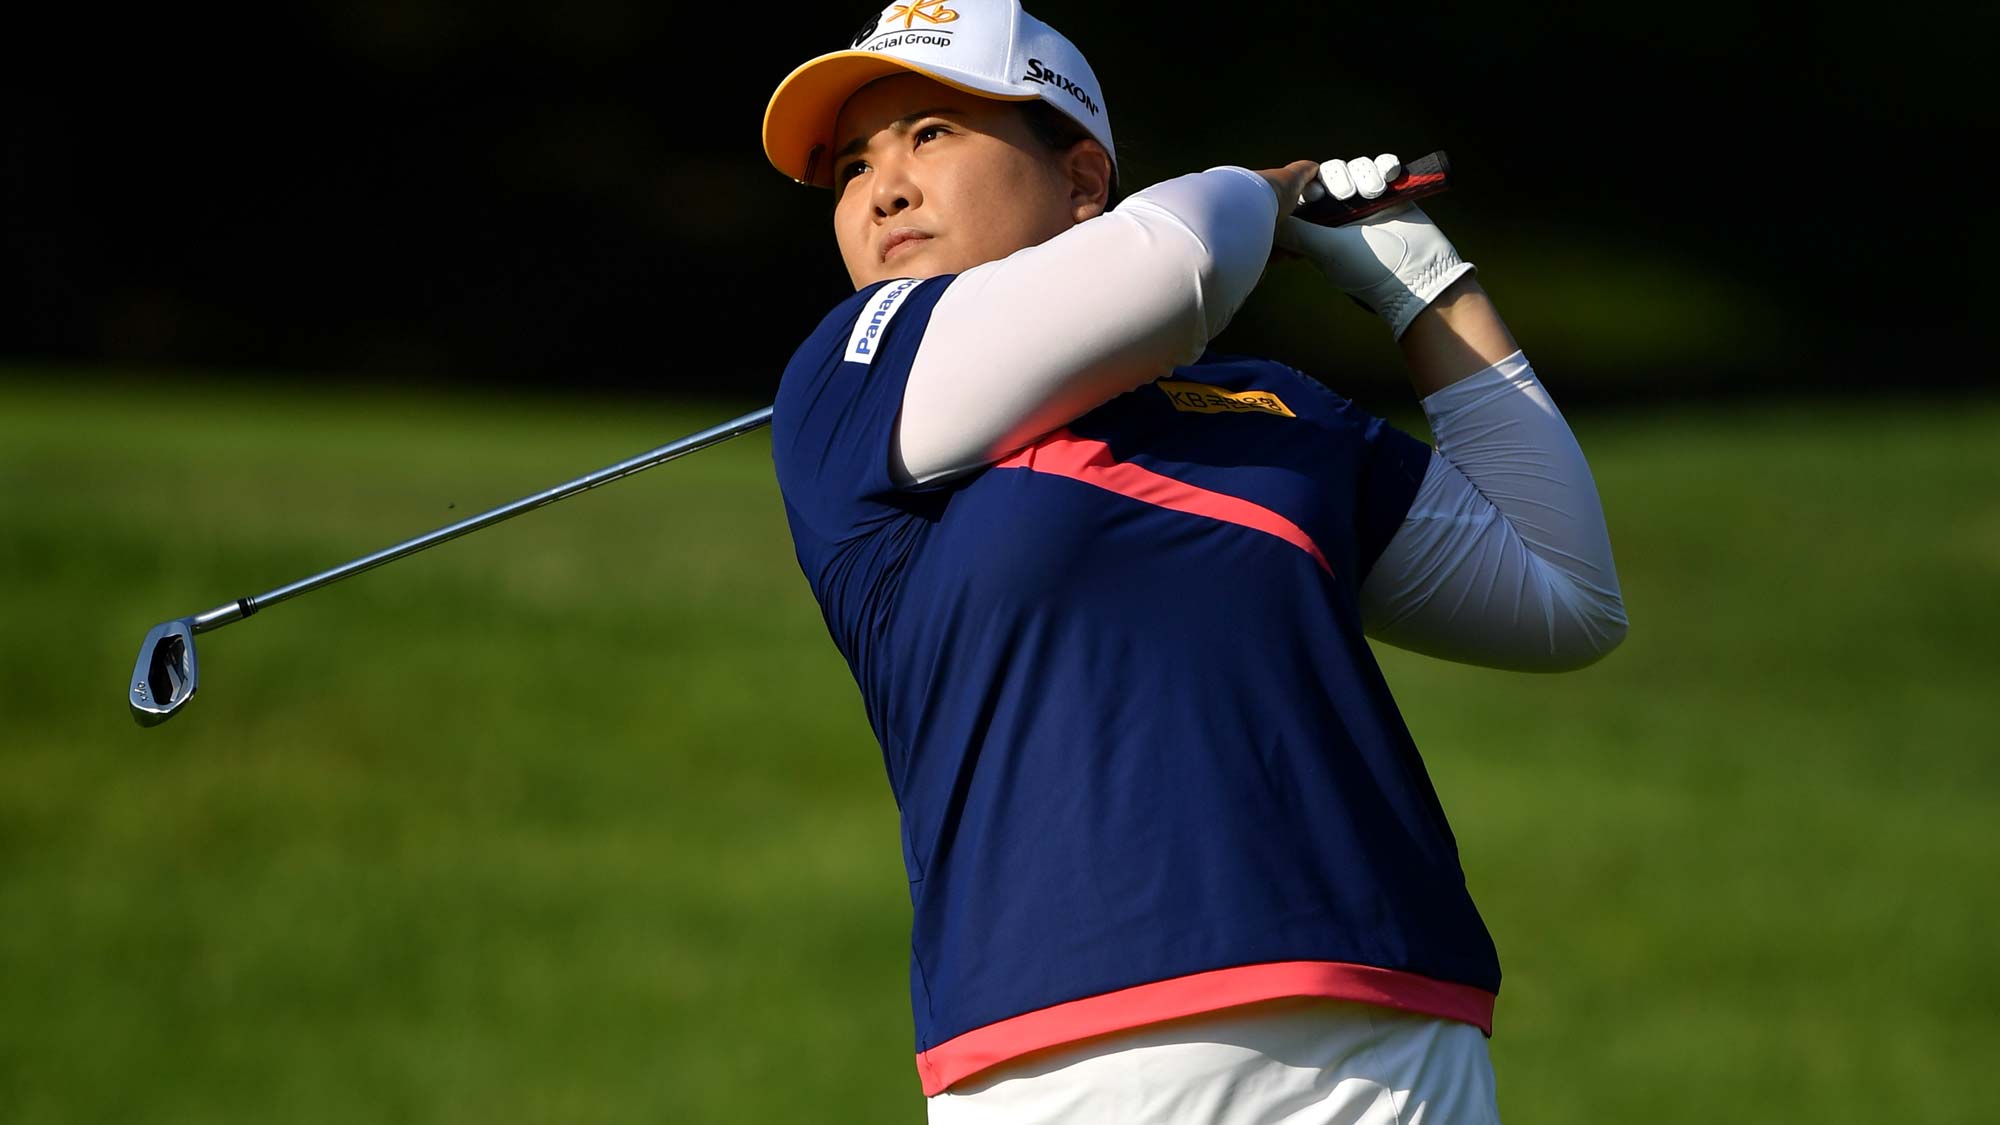 Inbee Park of Korea on the first during day 1 of the Evian Championship at Evian Resort Golf Club